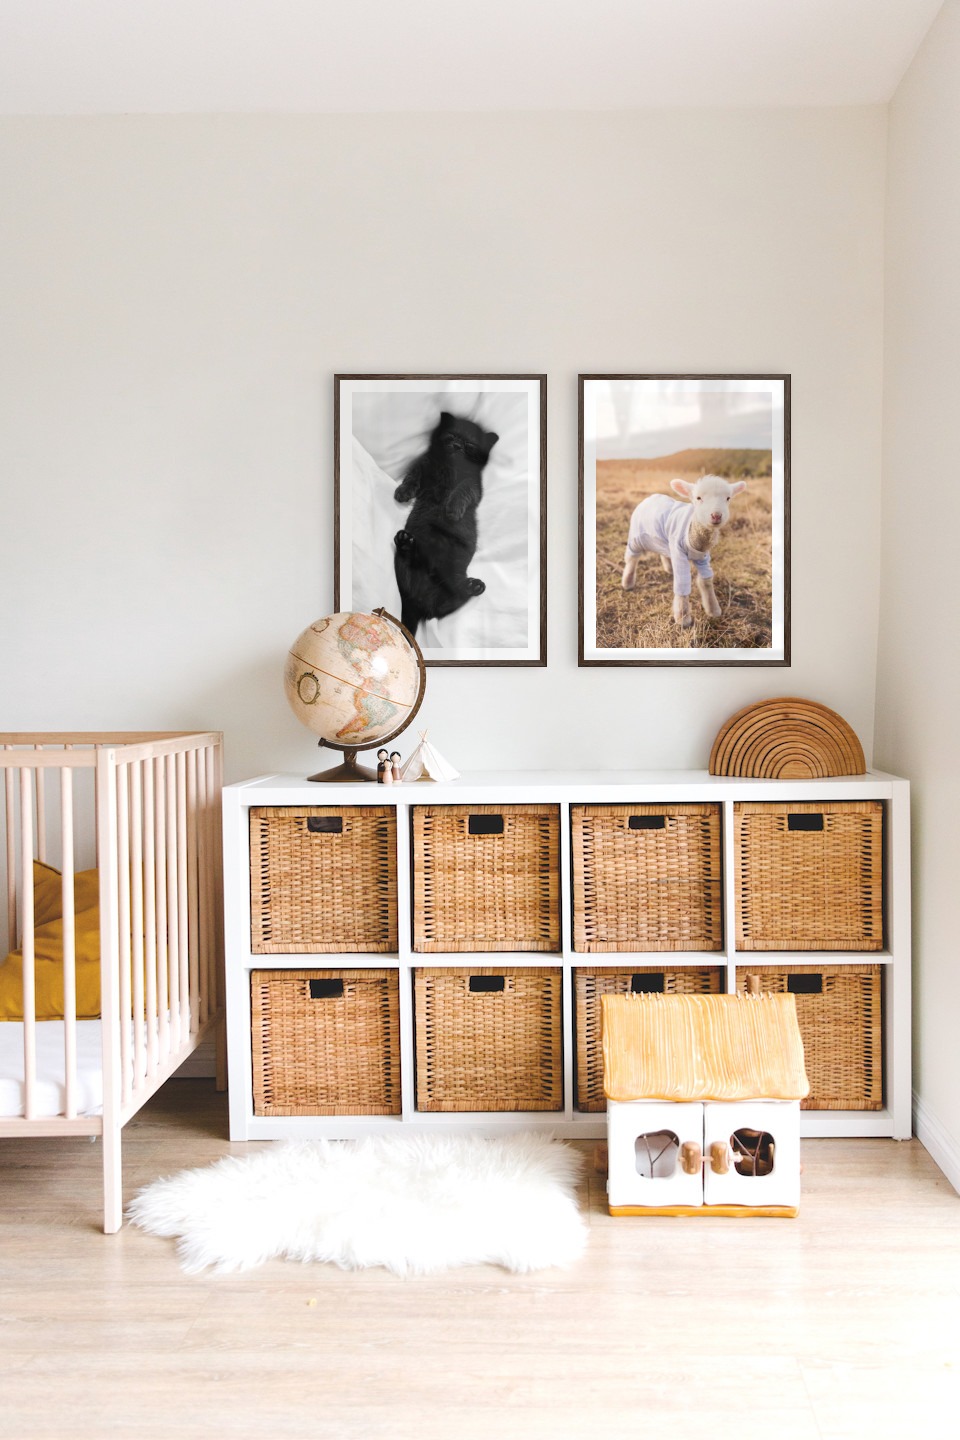 Gallery wall with picture frames in dark wood in sizes 50x70 with prints "Cat in bed" and "Lamb"